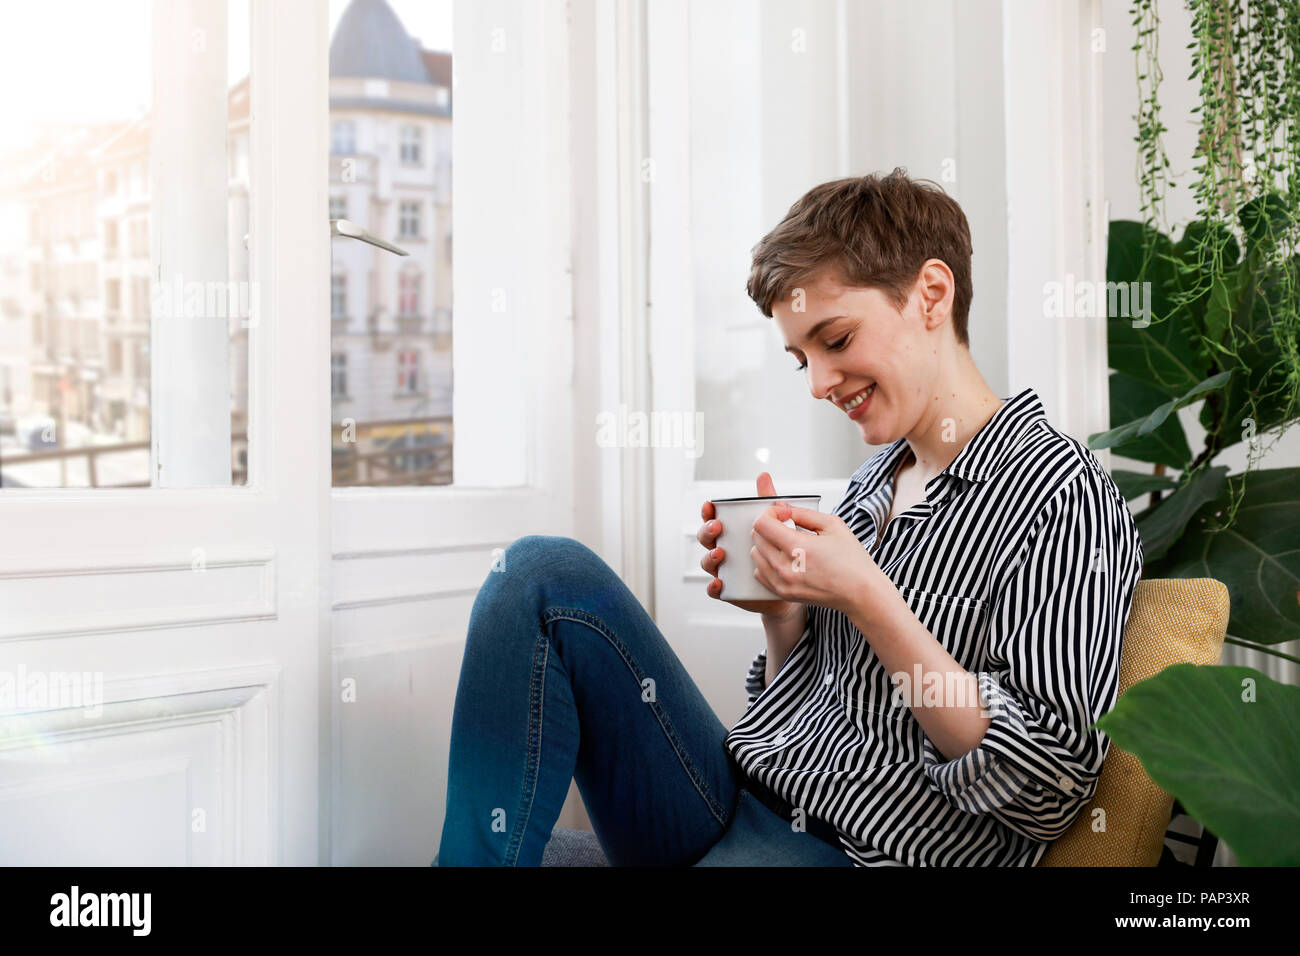 Happy woman sitting relaxed at window, drinking coffee Stock Photo